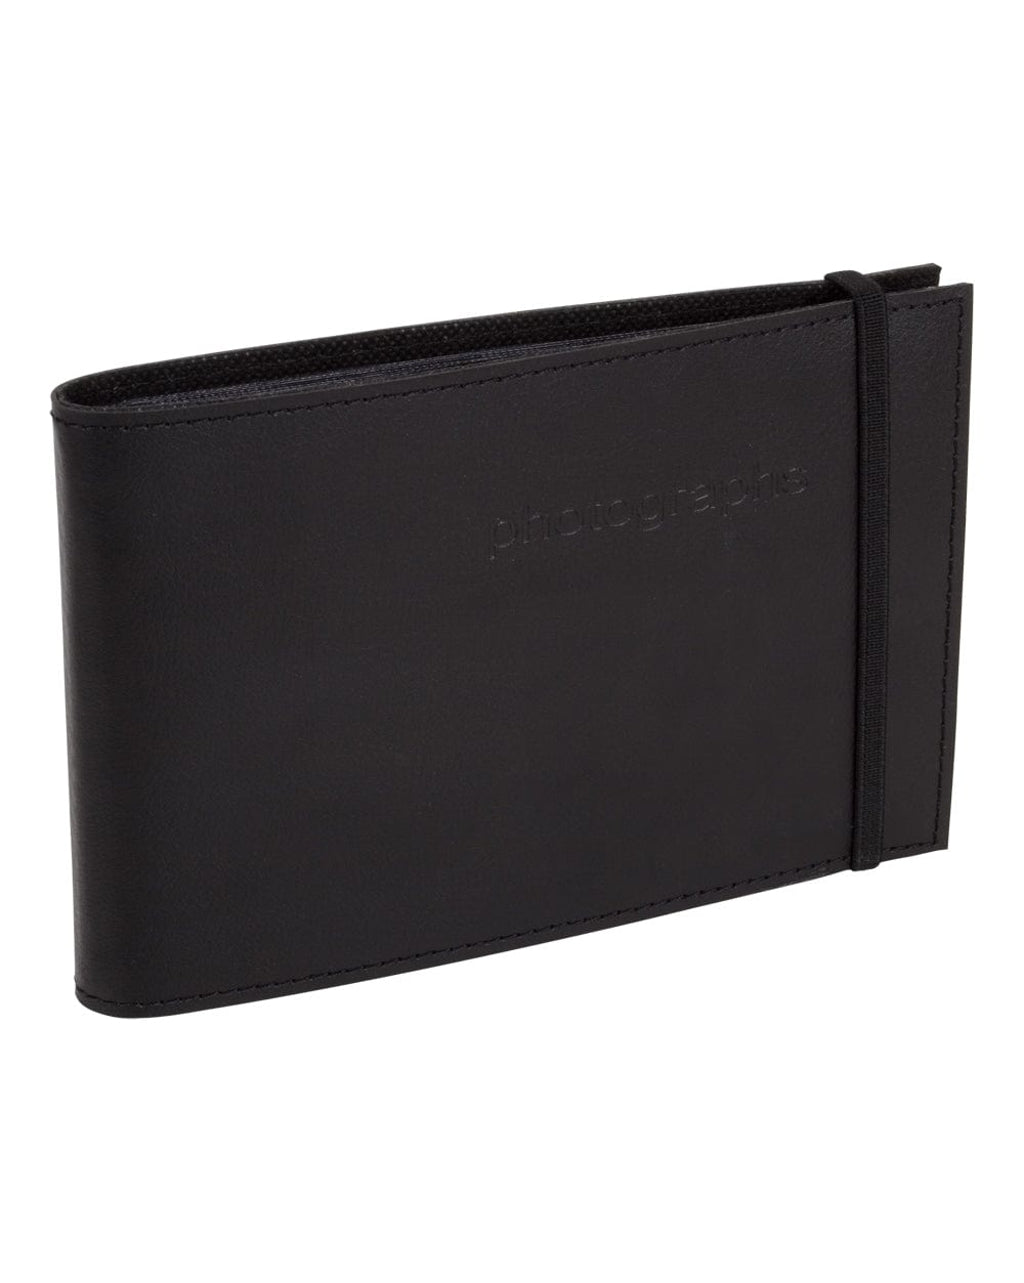 Citi Leather Black Slip-in Bragbook Photo Album from our Photo Albums collection by Profile Products Australia